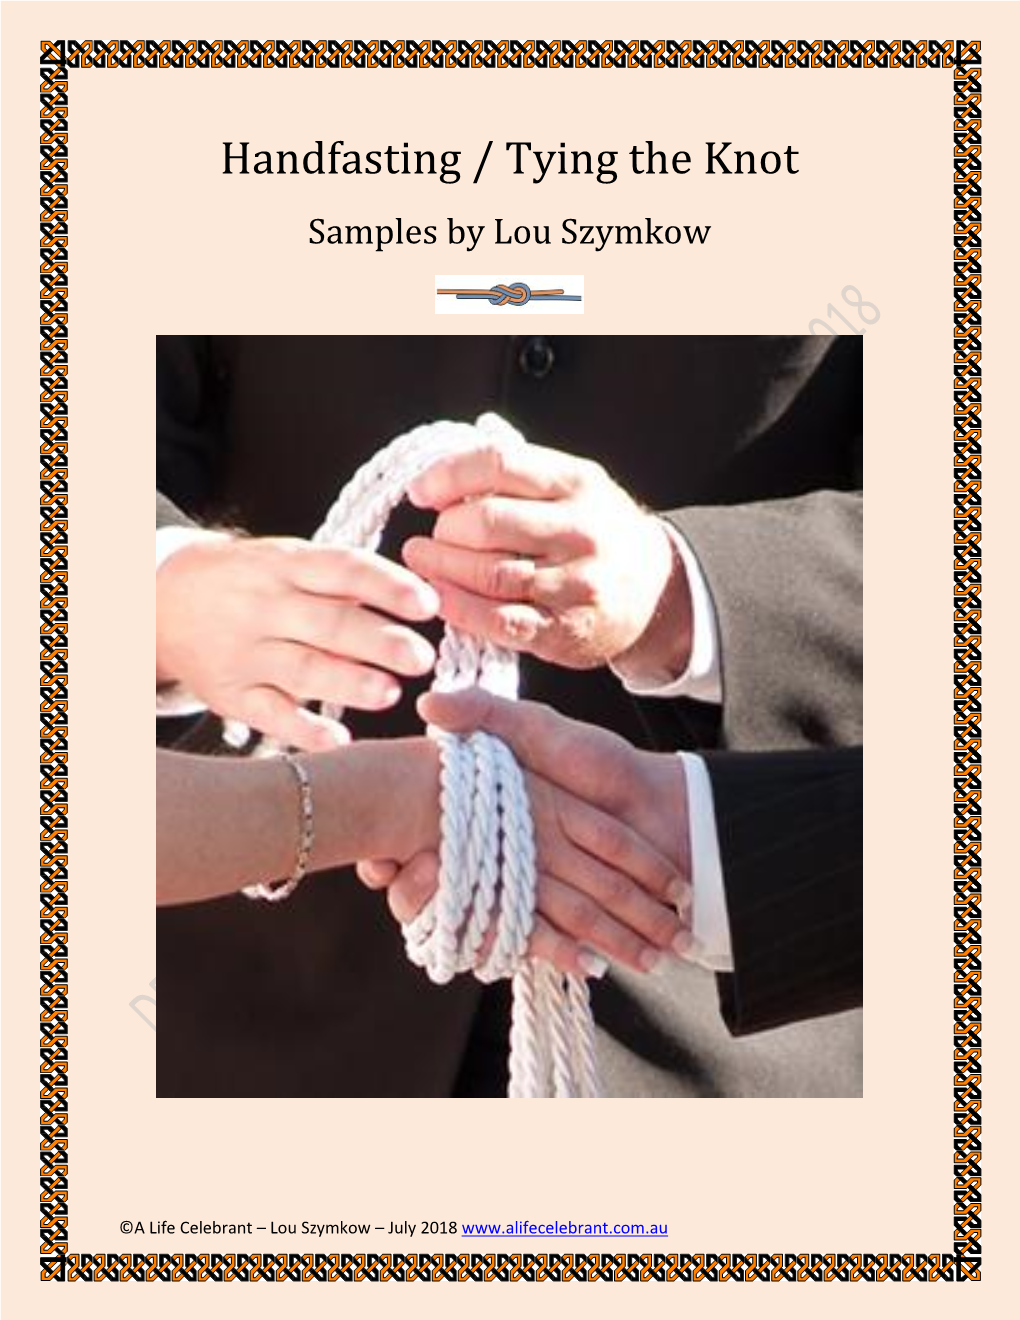 Handfasting / Tying the Knot Samples by Lou Szymkow